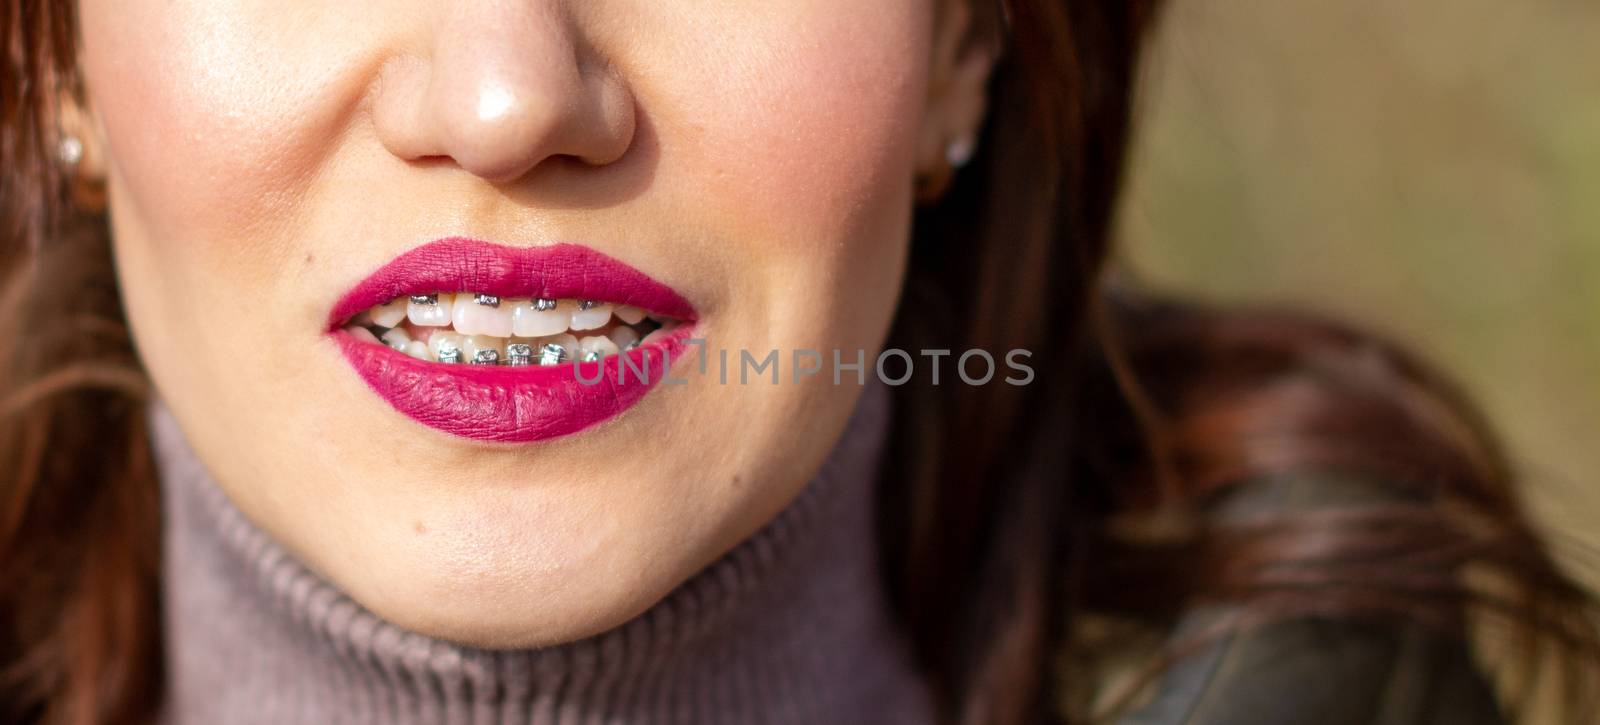 The brace system in the girl's smiling mouth, close-up of red lips by AnatoliiFoto